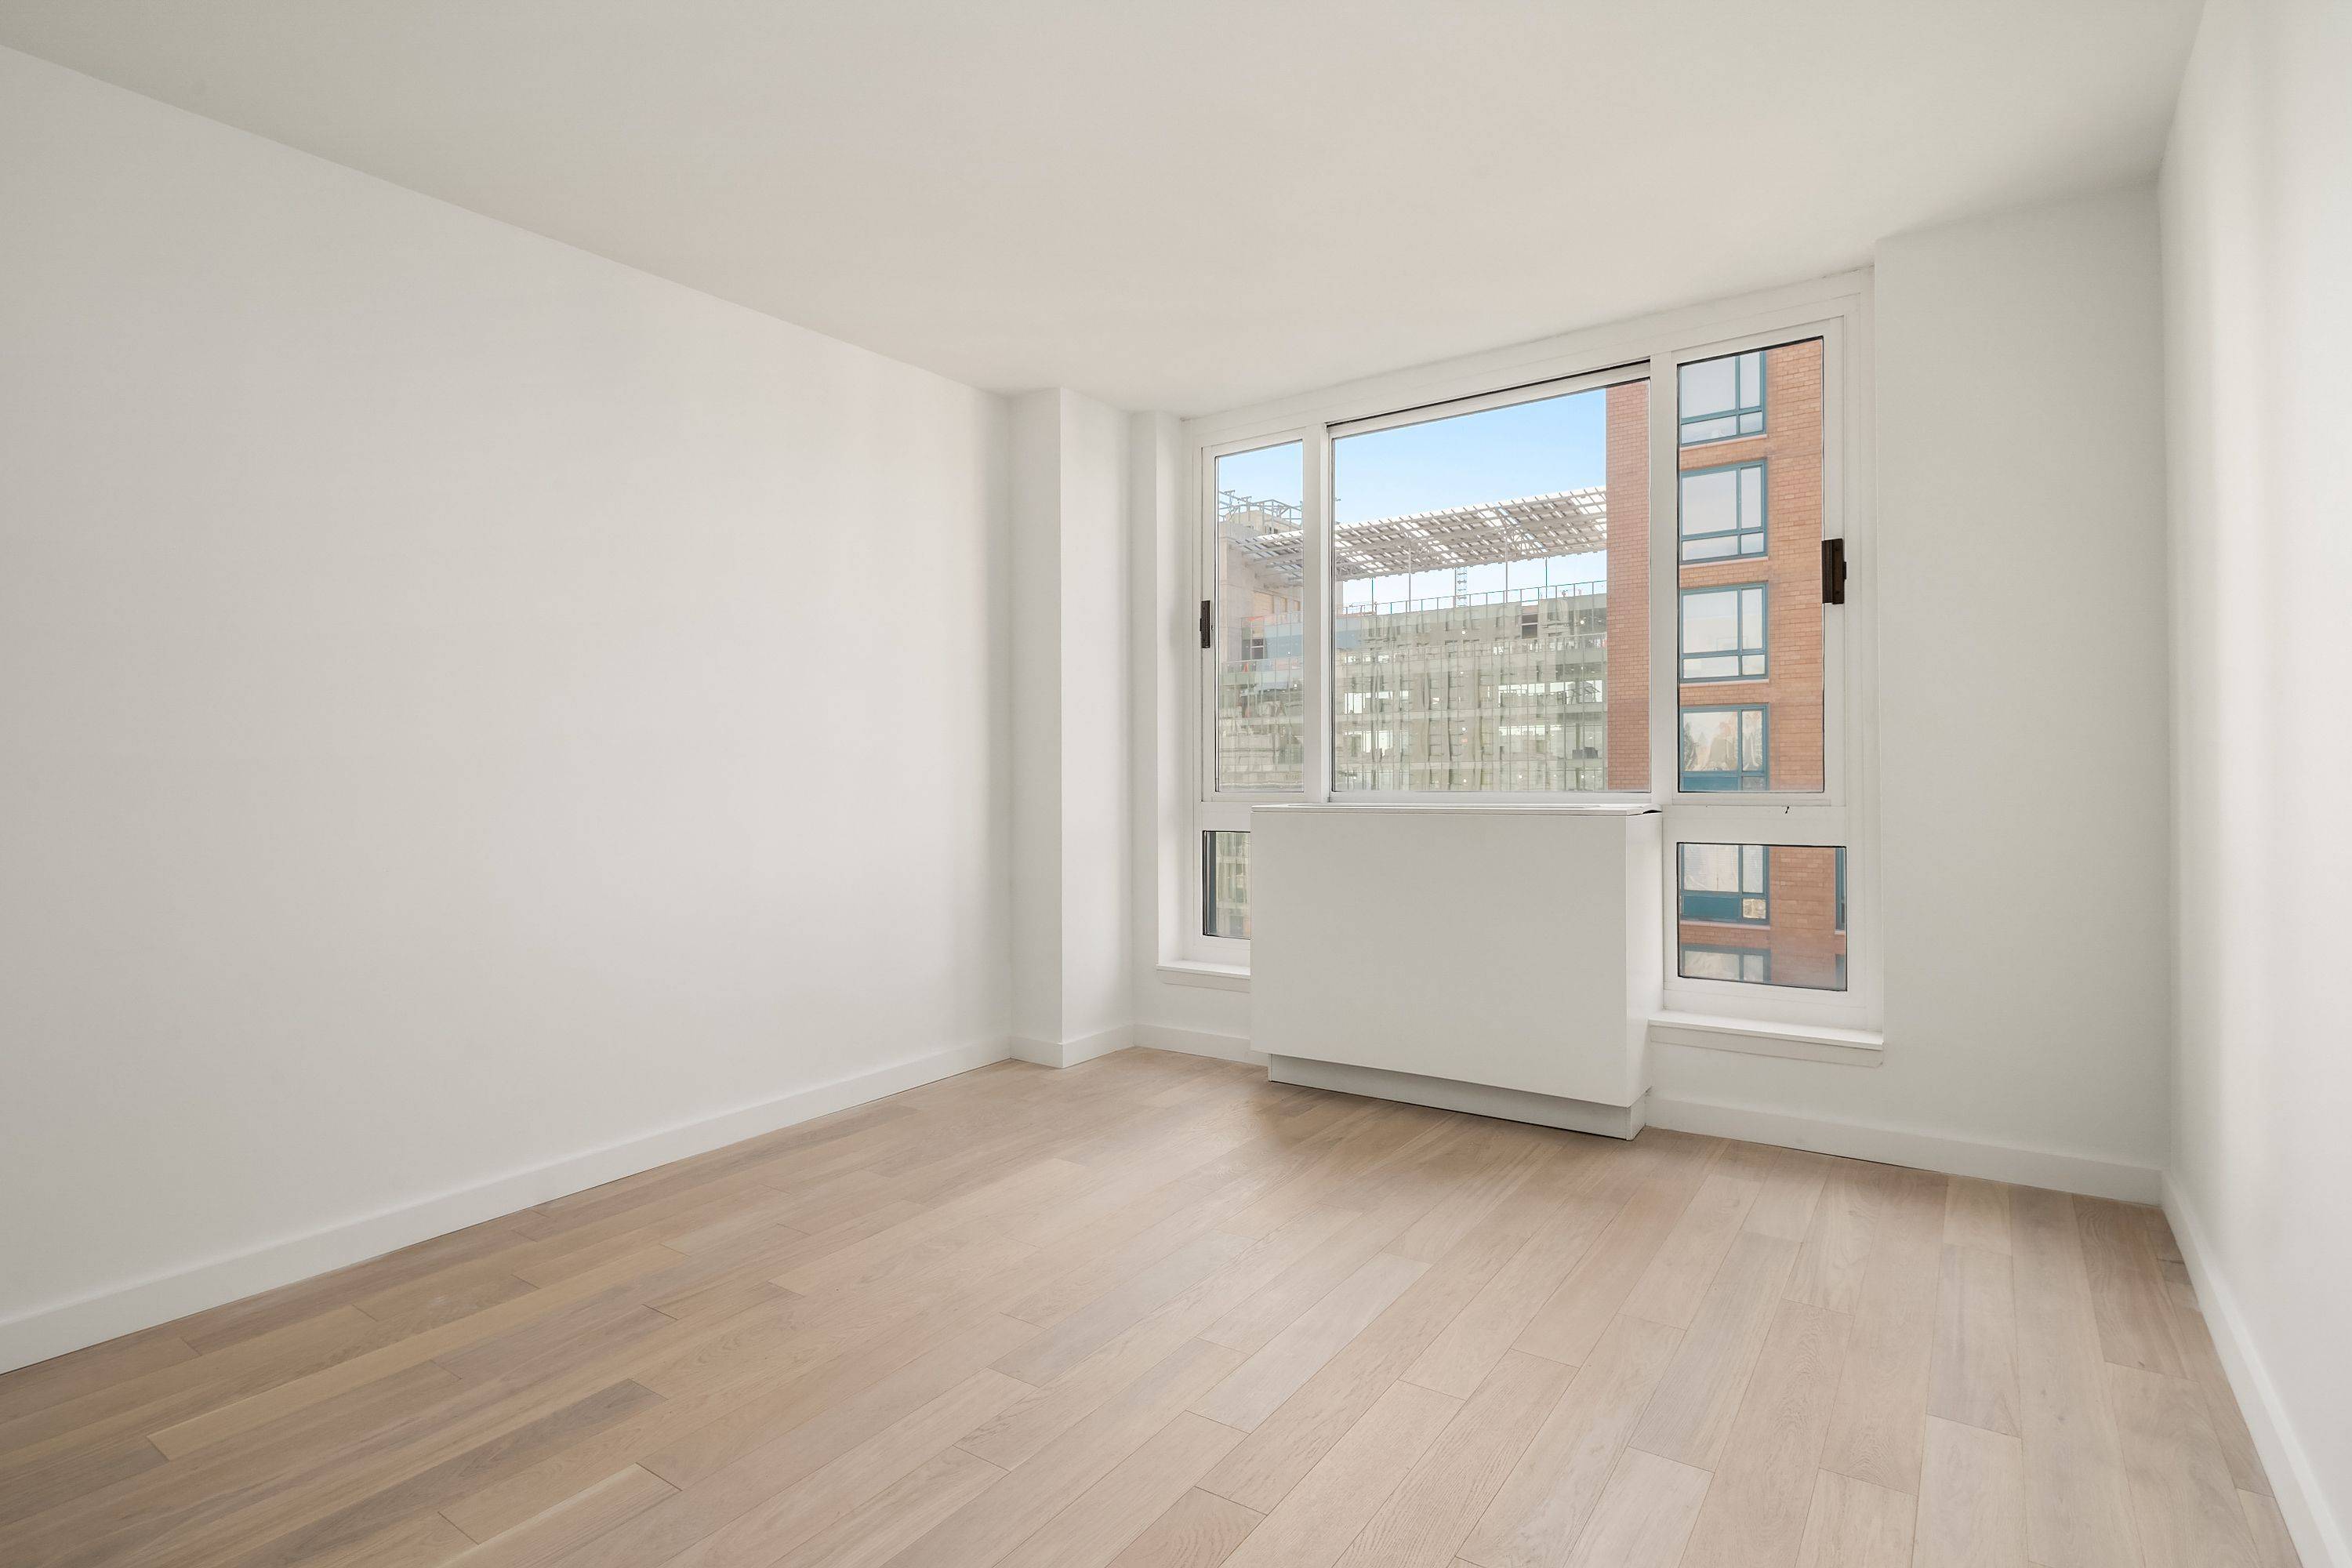 Welcome to this exceptional corner unit with landmark views, custom walk in closet, and gorgeous brand new flooring throughout in full service, luxury building off of iconic Irving Place.